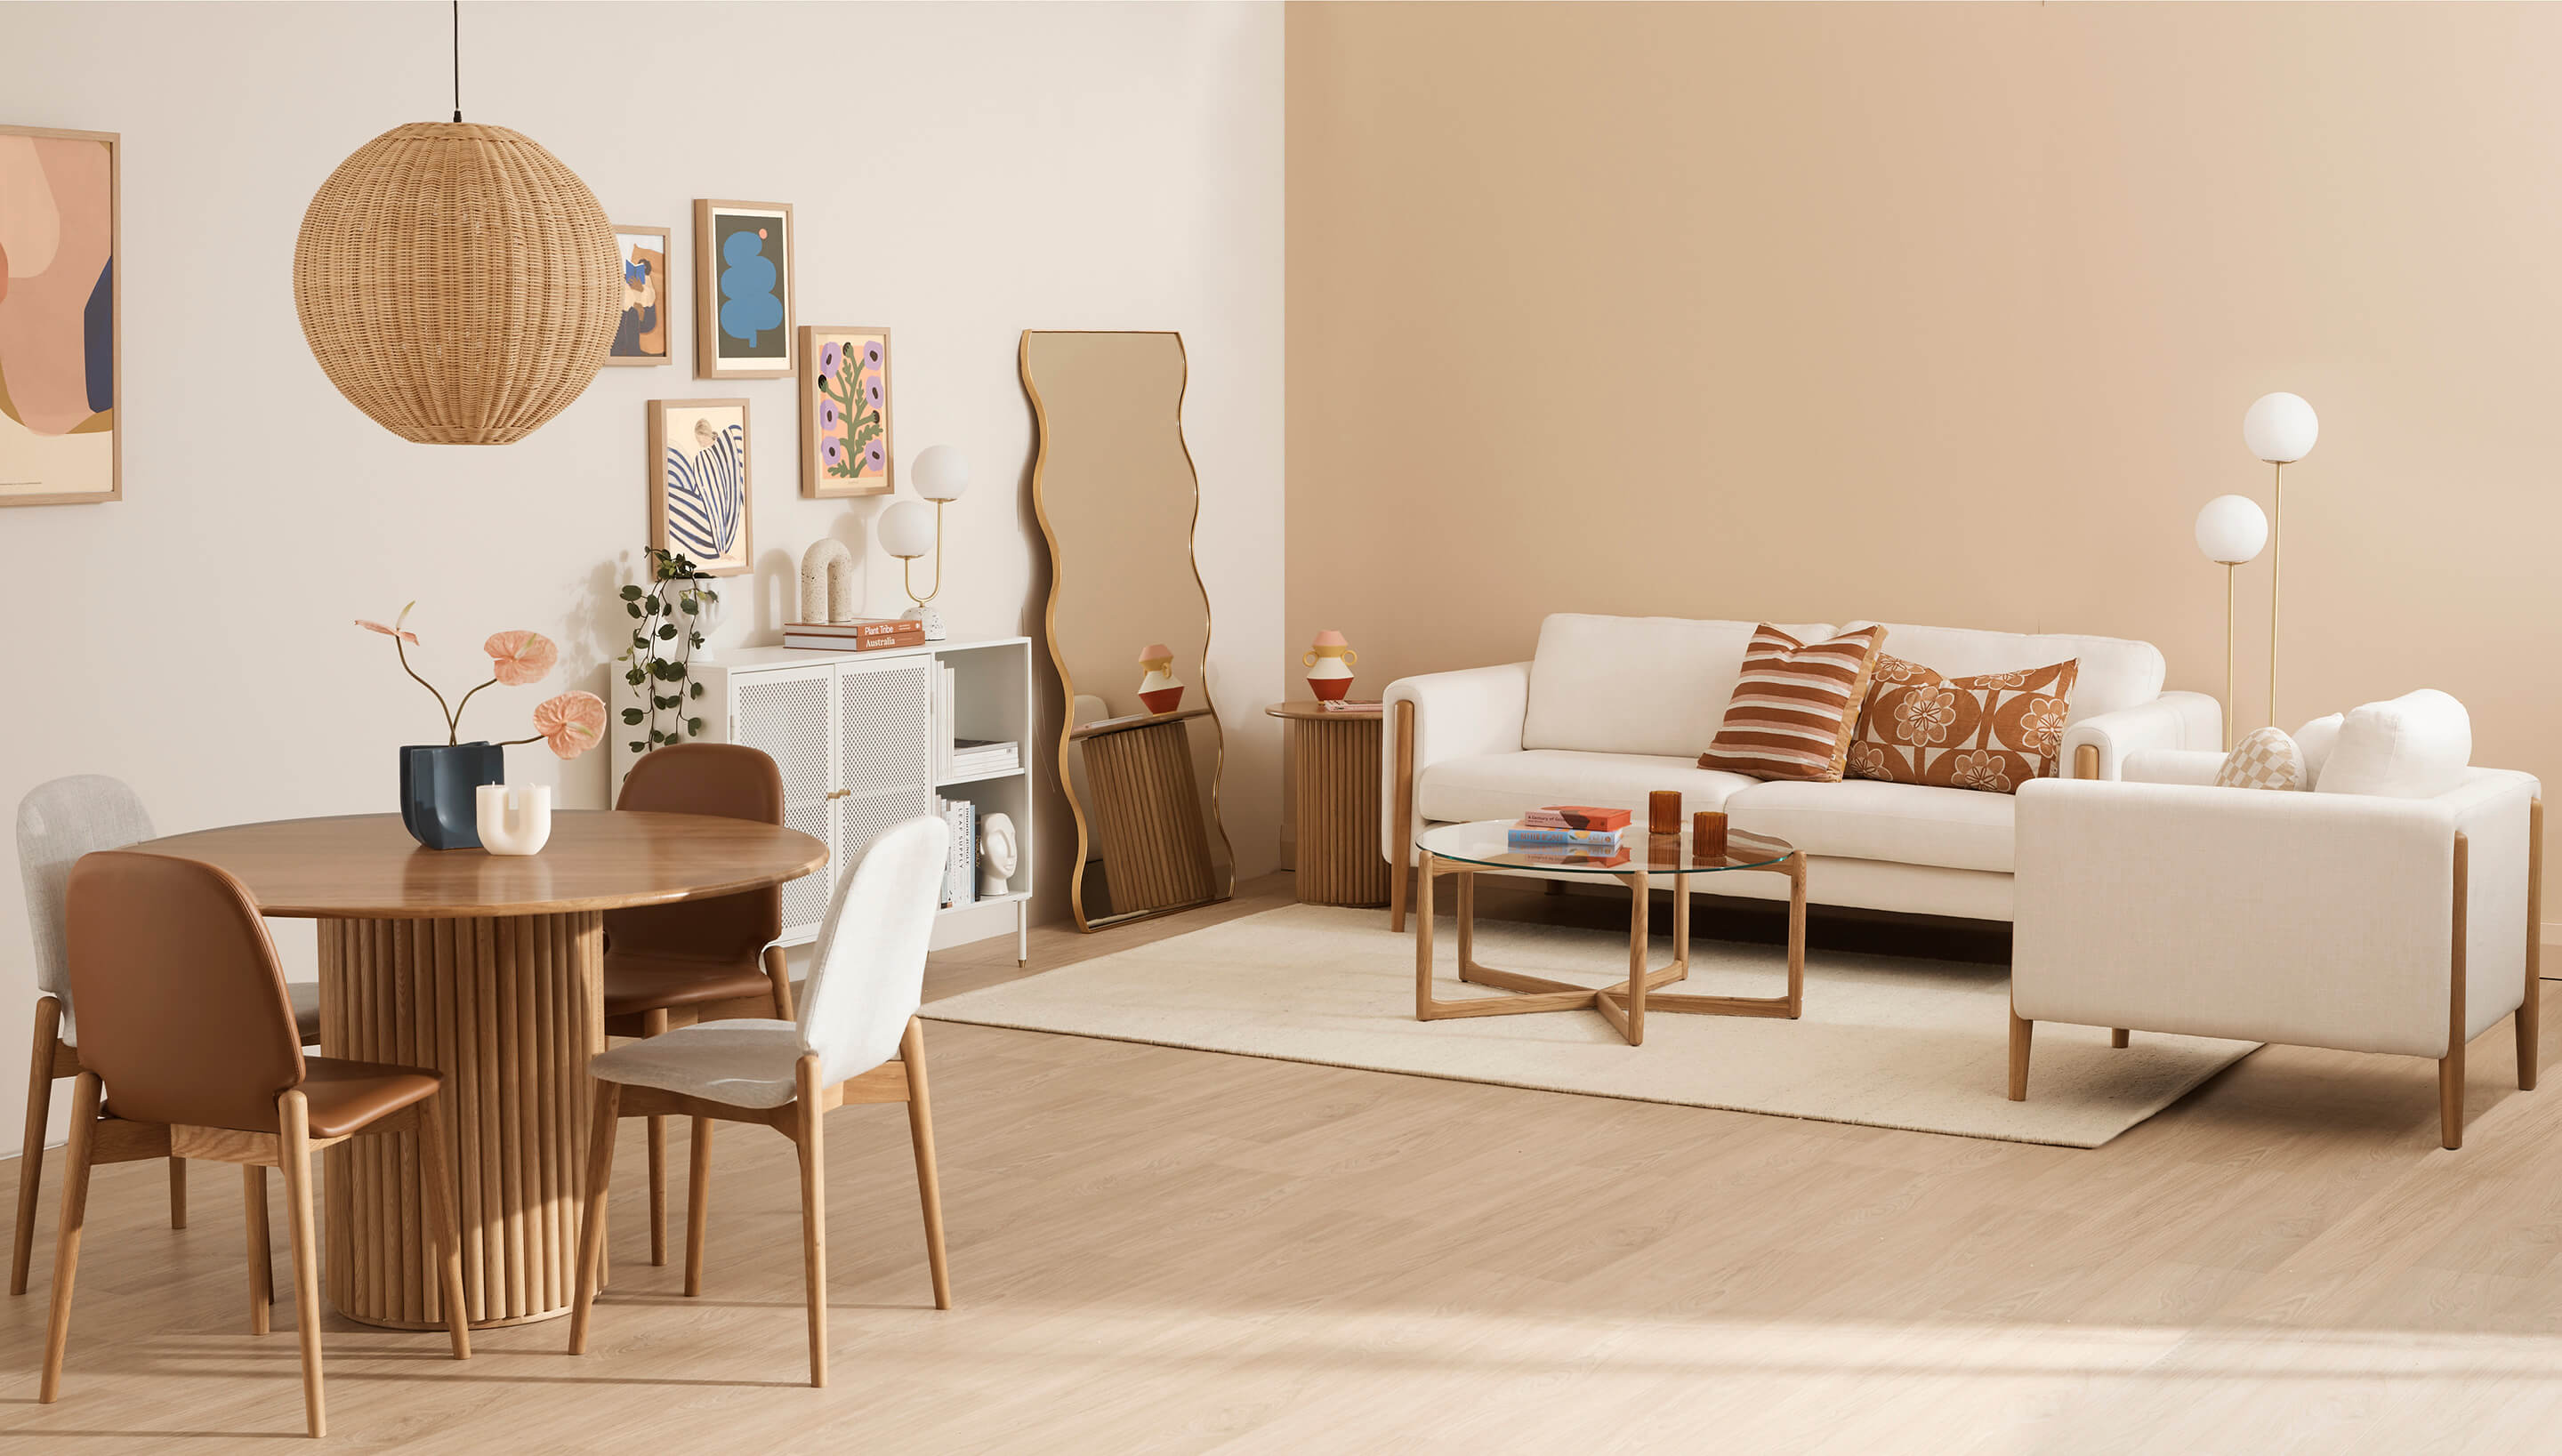 Introducing our Abode Spring Summer 22 collection, full of neutral yet fun living, dining, home office, and bedroom spaces. Shop the Bronte living and dining collection online or in-store now!